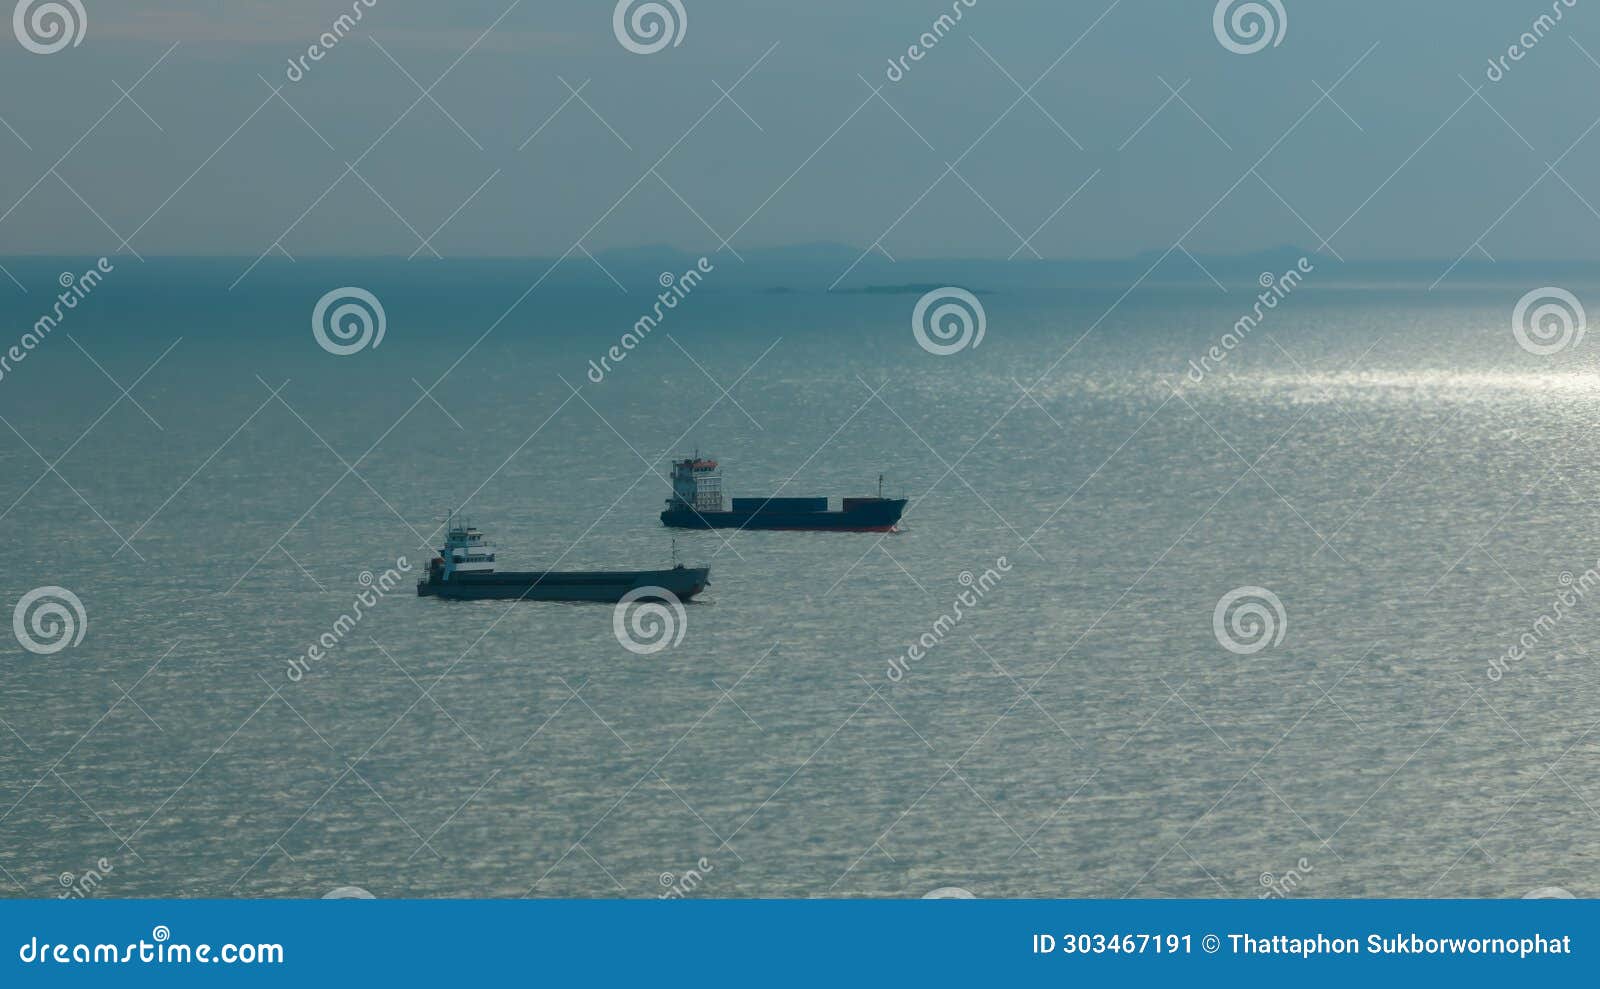 two cargo ship floating in sea, aerialview